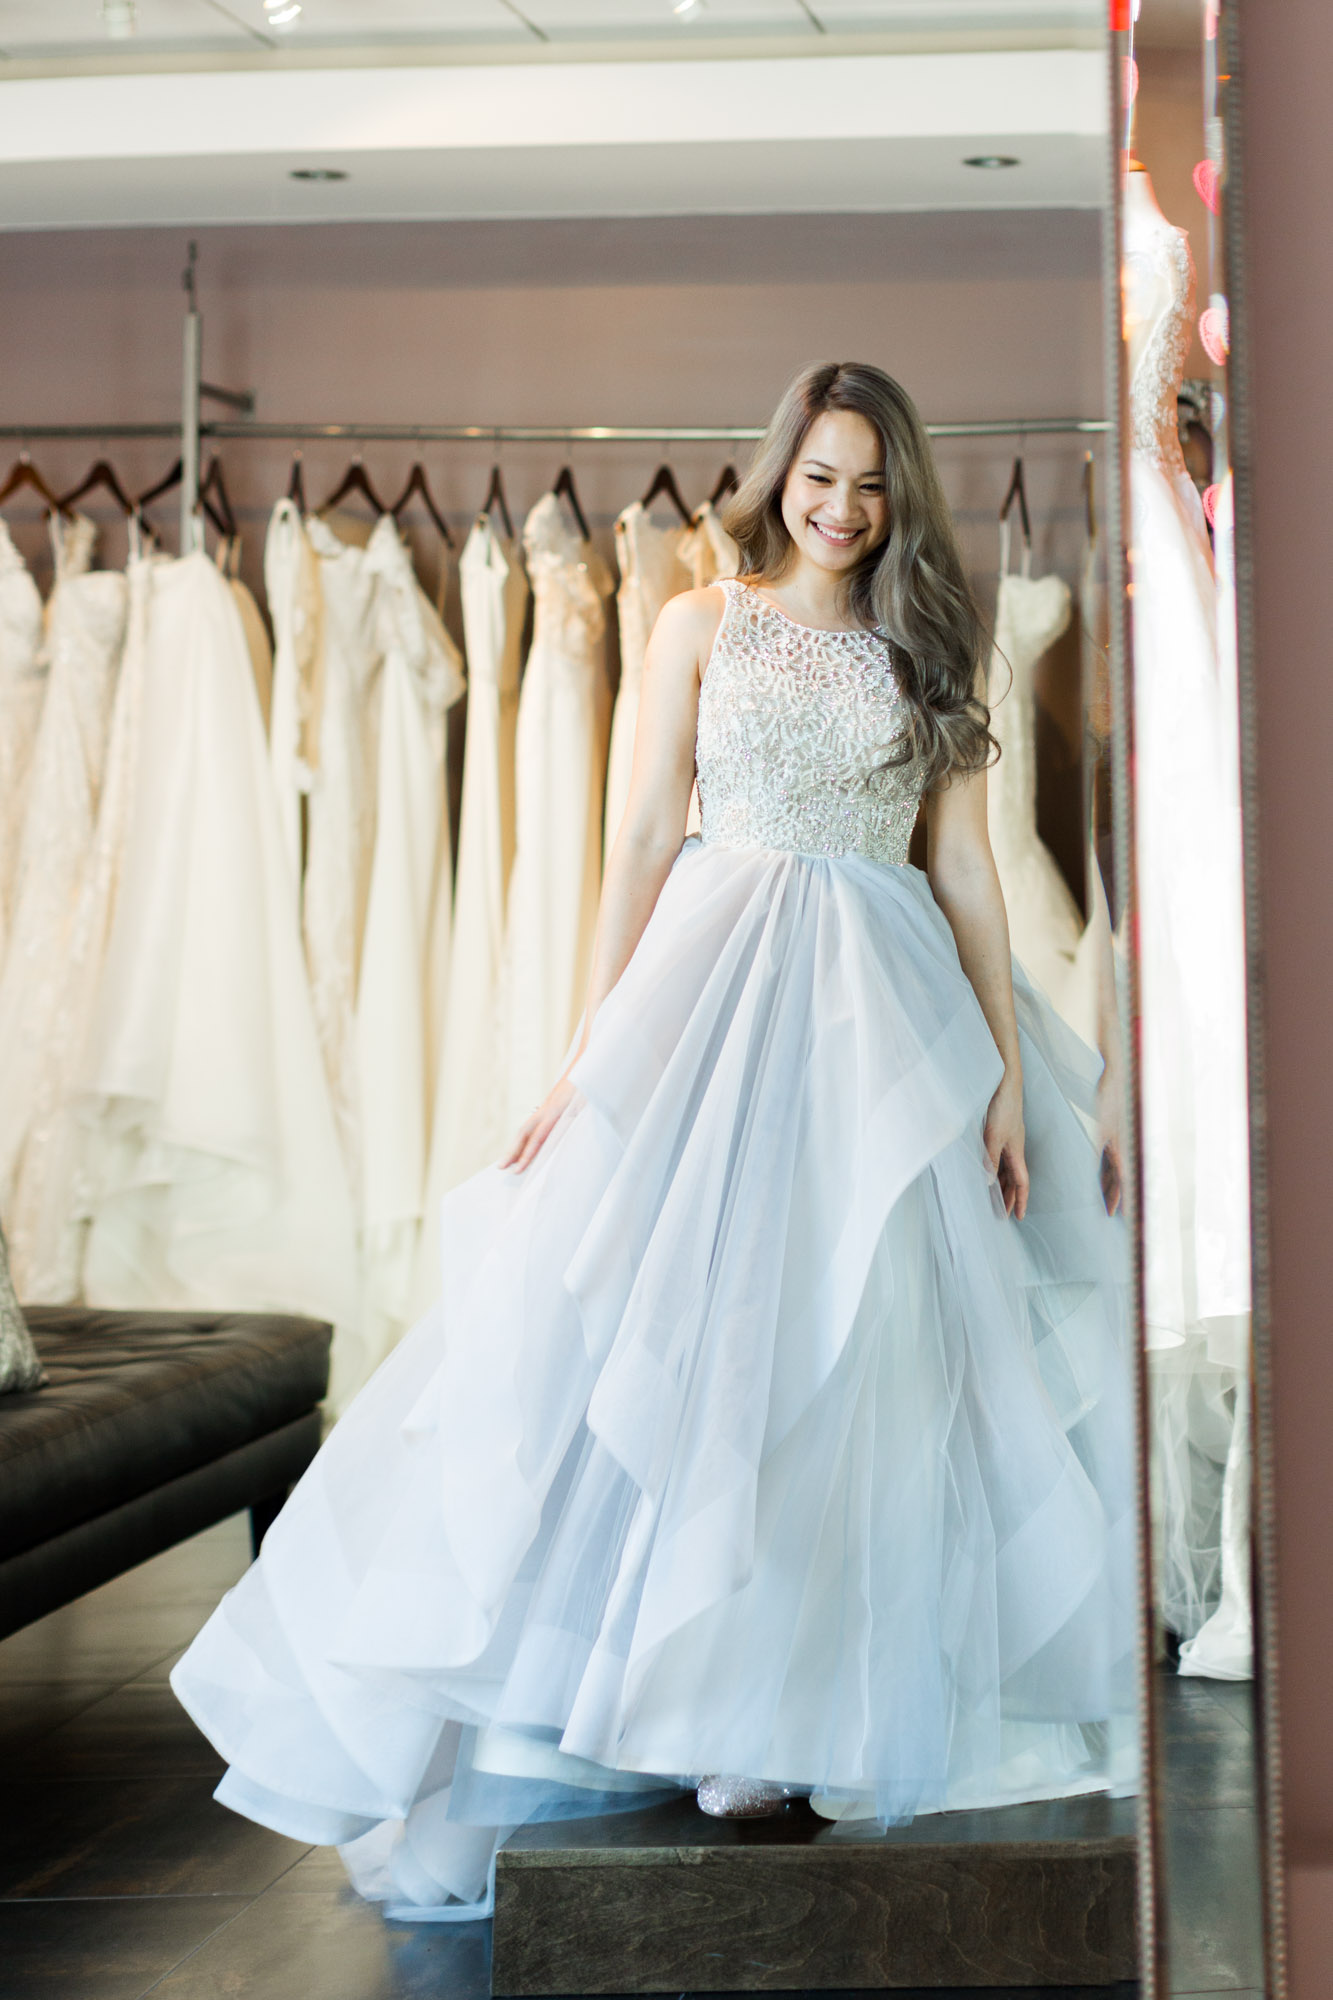 Wedding Planning || A Fashion Blogger’s Perspectives on Bridal Gown Trying-On